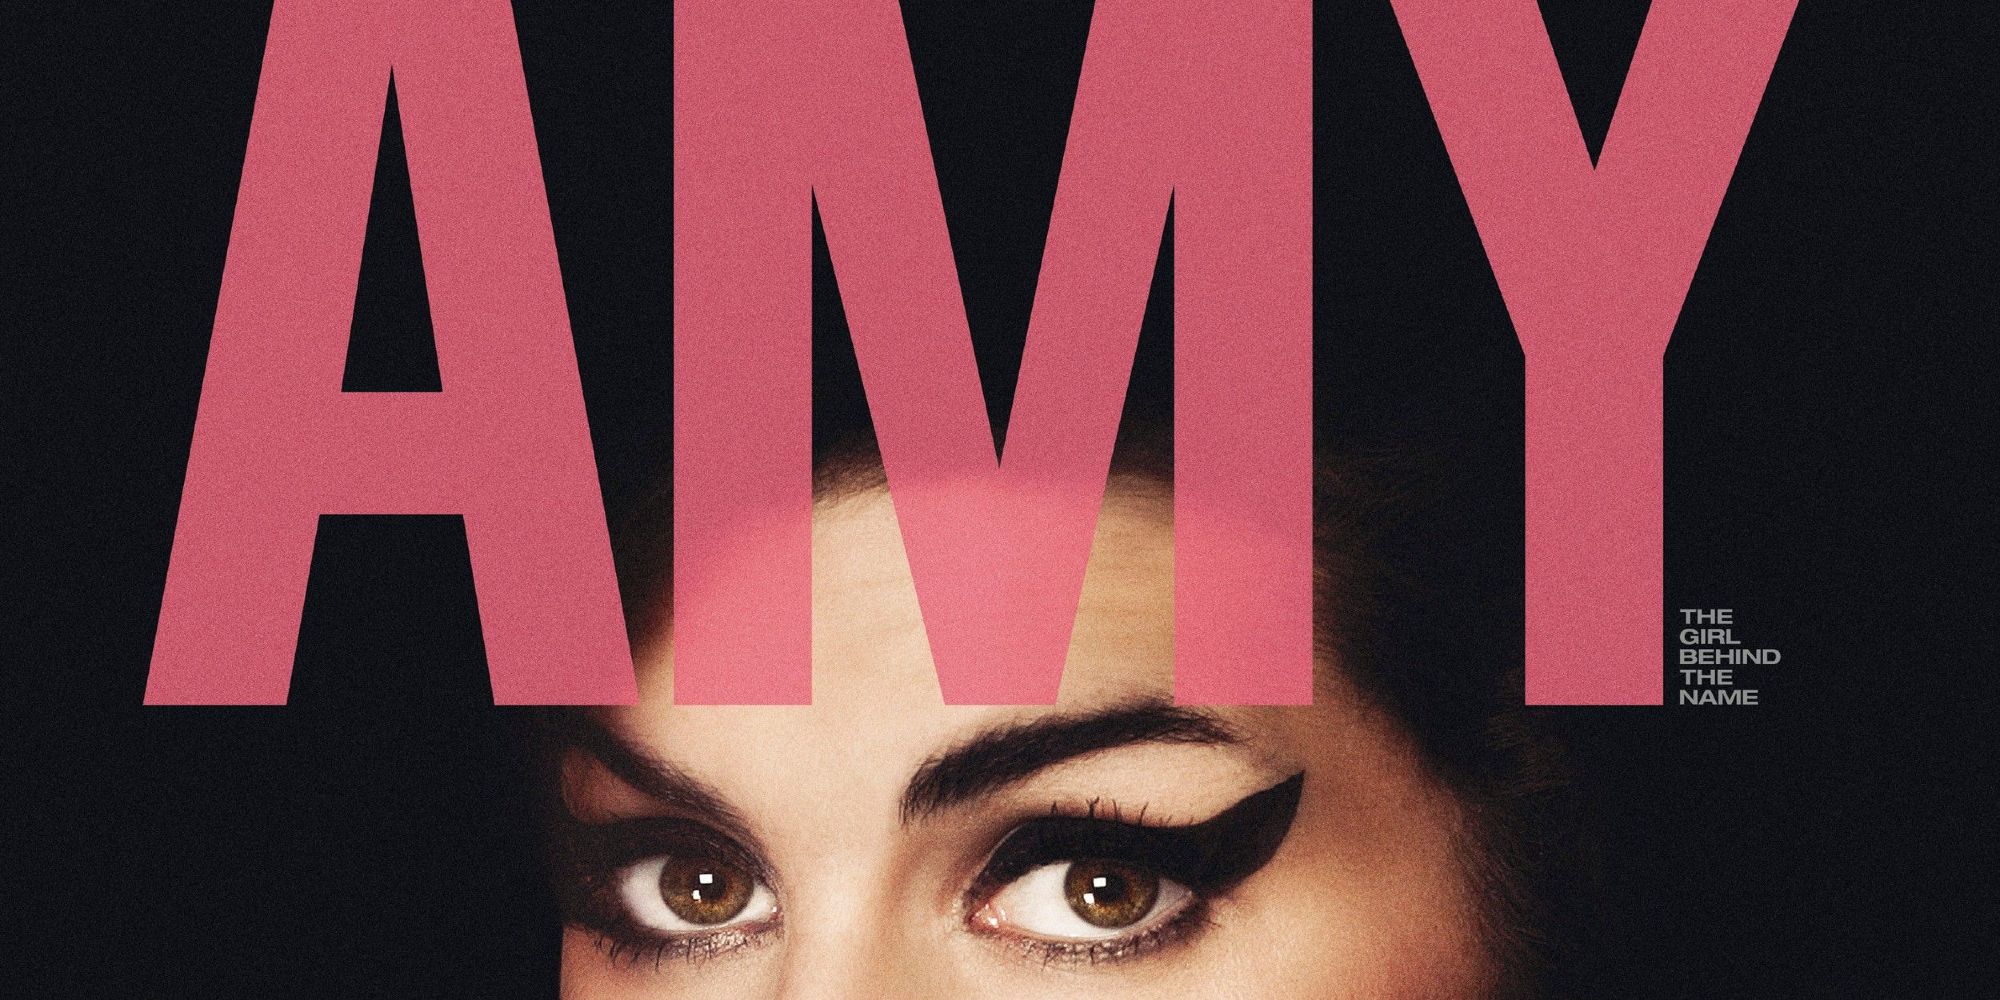 A promotional poster for the documentary Amy.